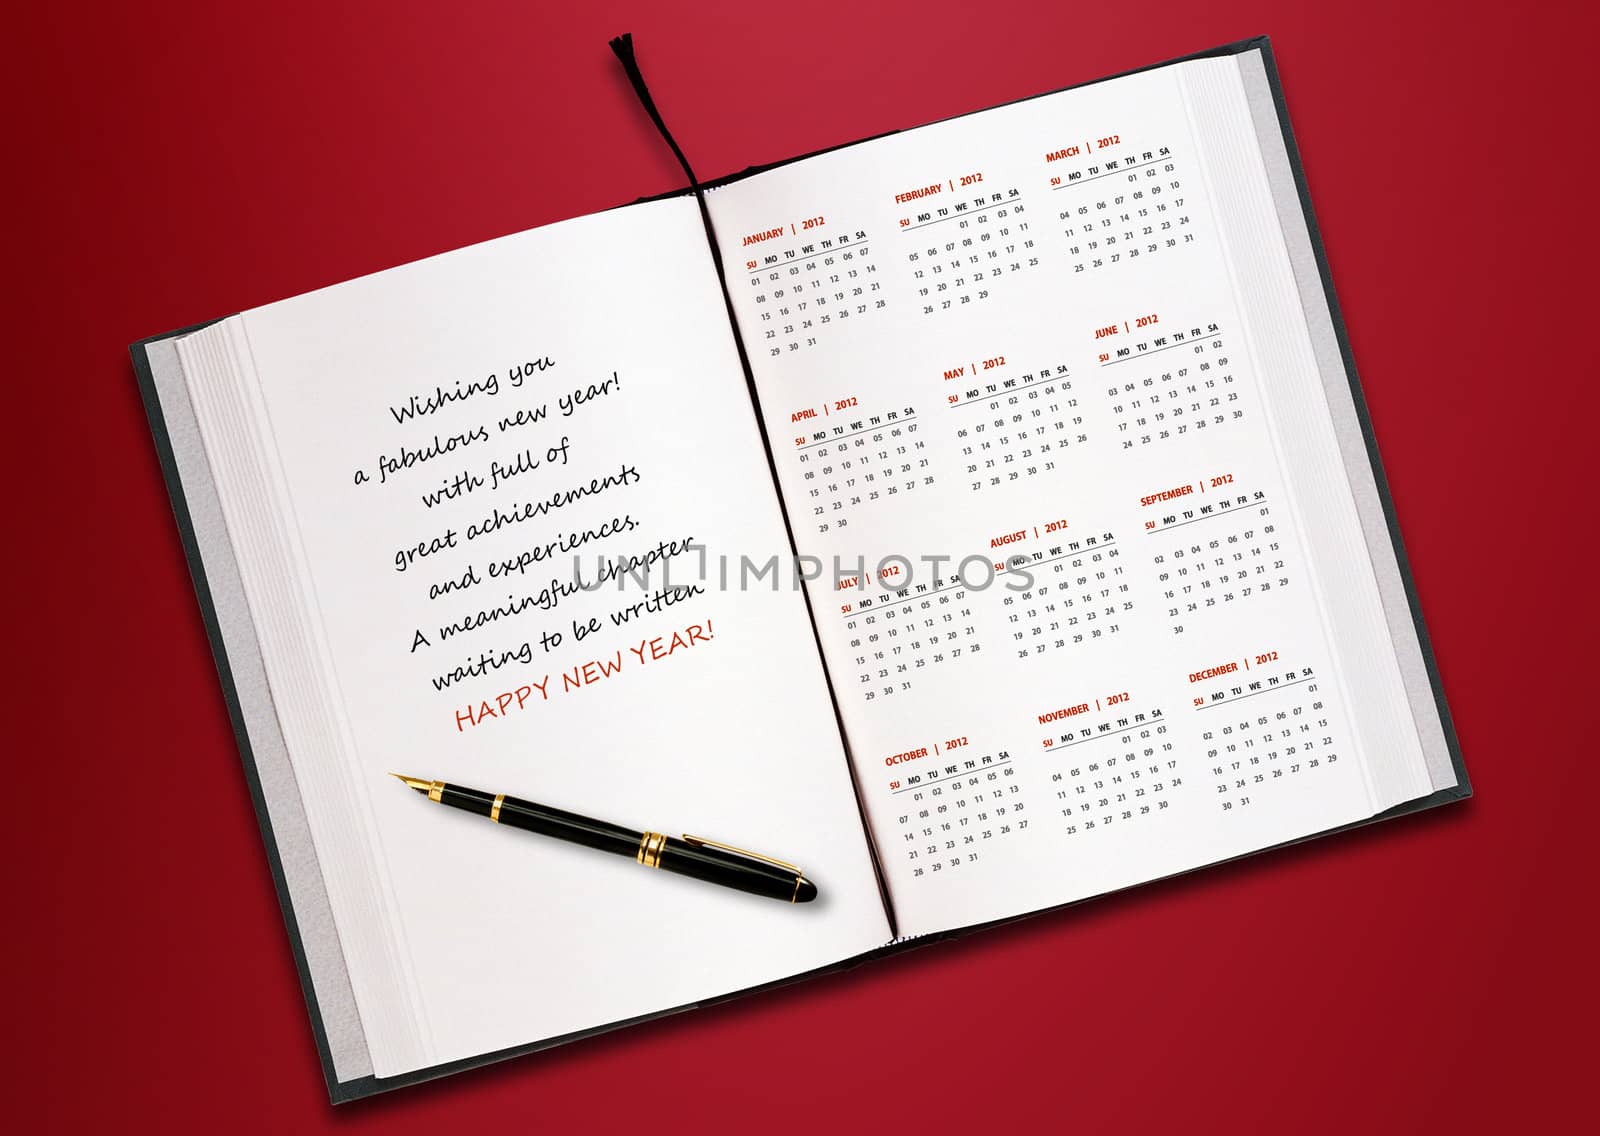 New year 2012 Calendar with conceptual image of new year greeting.